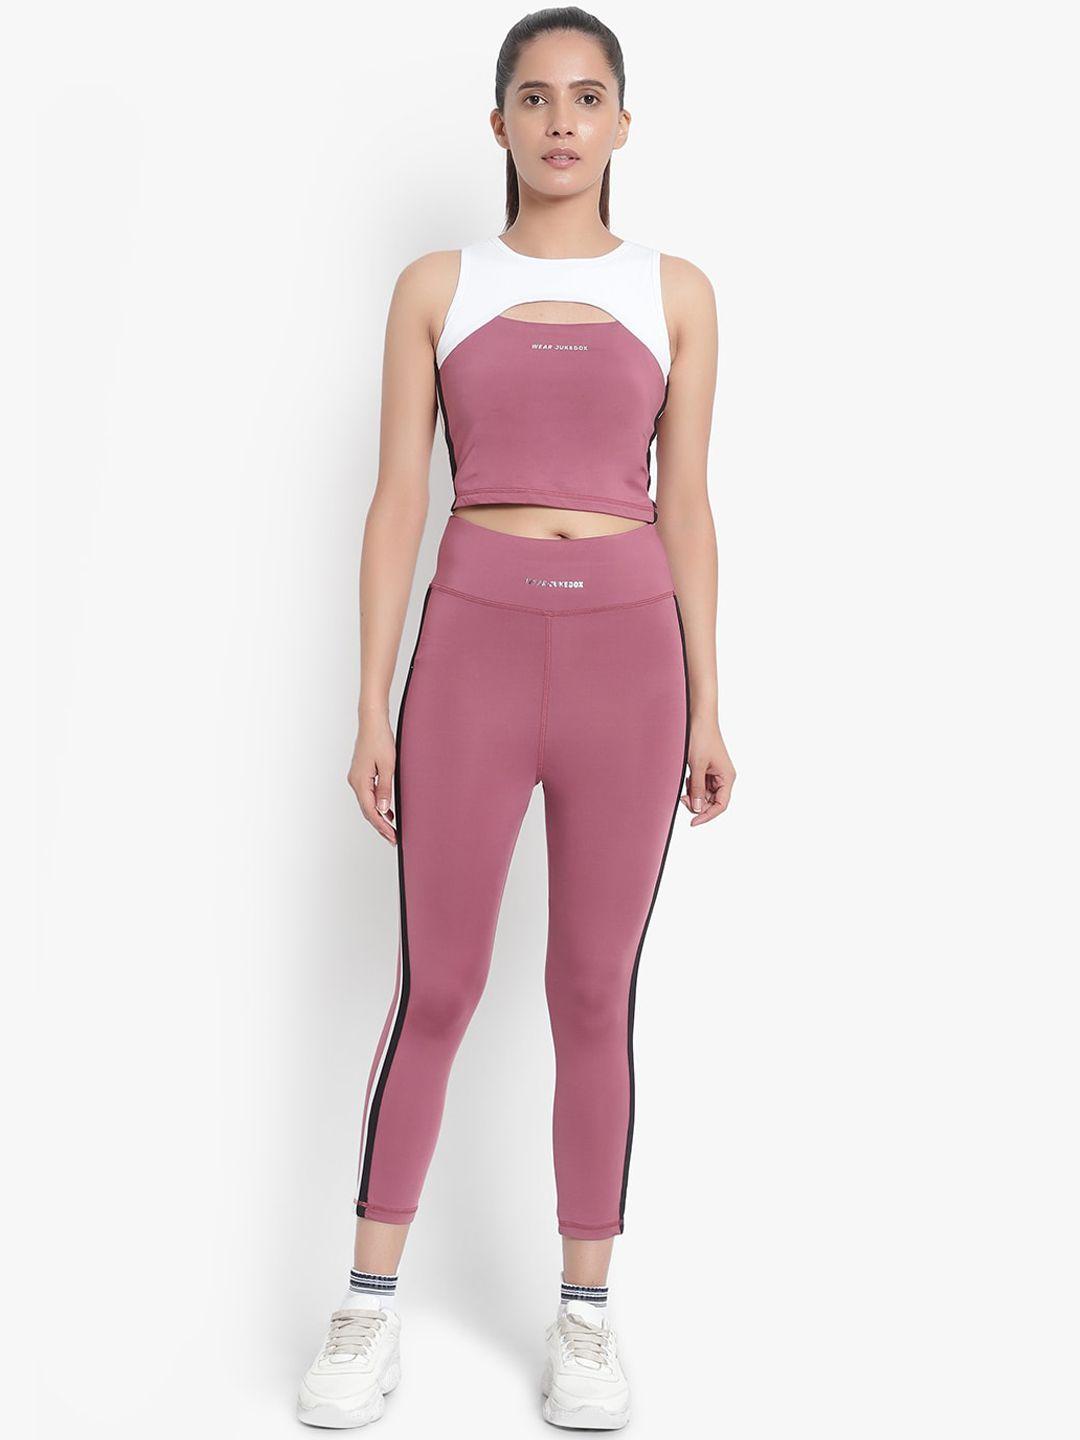 wearjukebox women pink & white solid tights & top co-ords